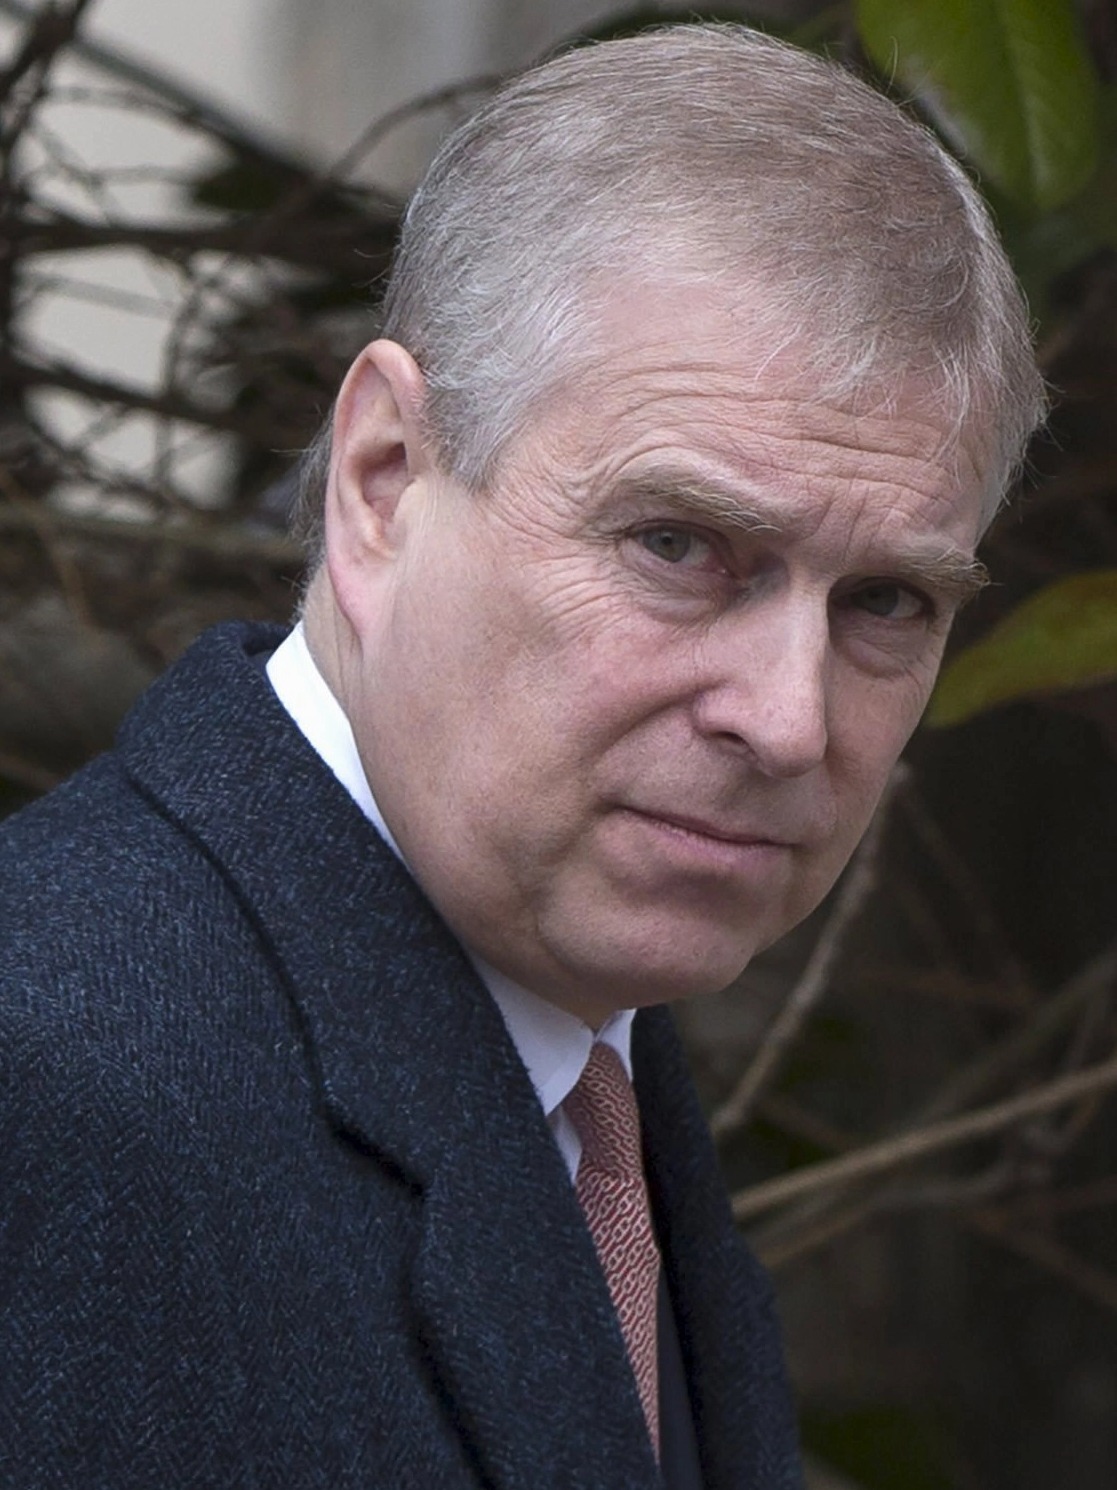 Prince Andrew licked between my toes & the arches of my feet in longest ten minutes of my life, claims Virginia Roberts